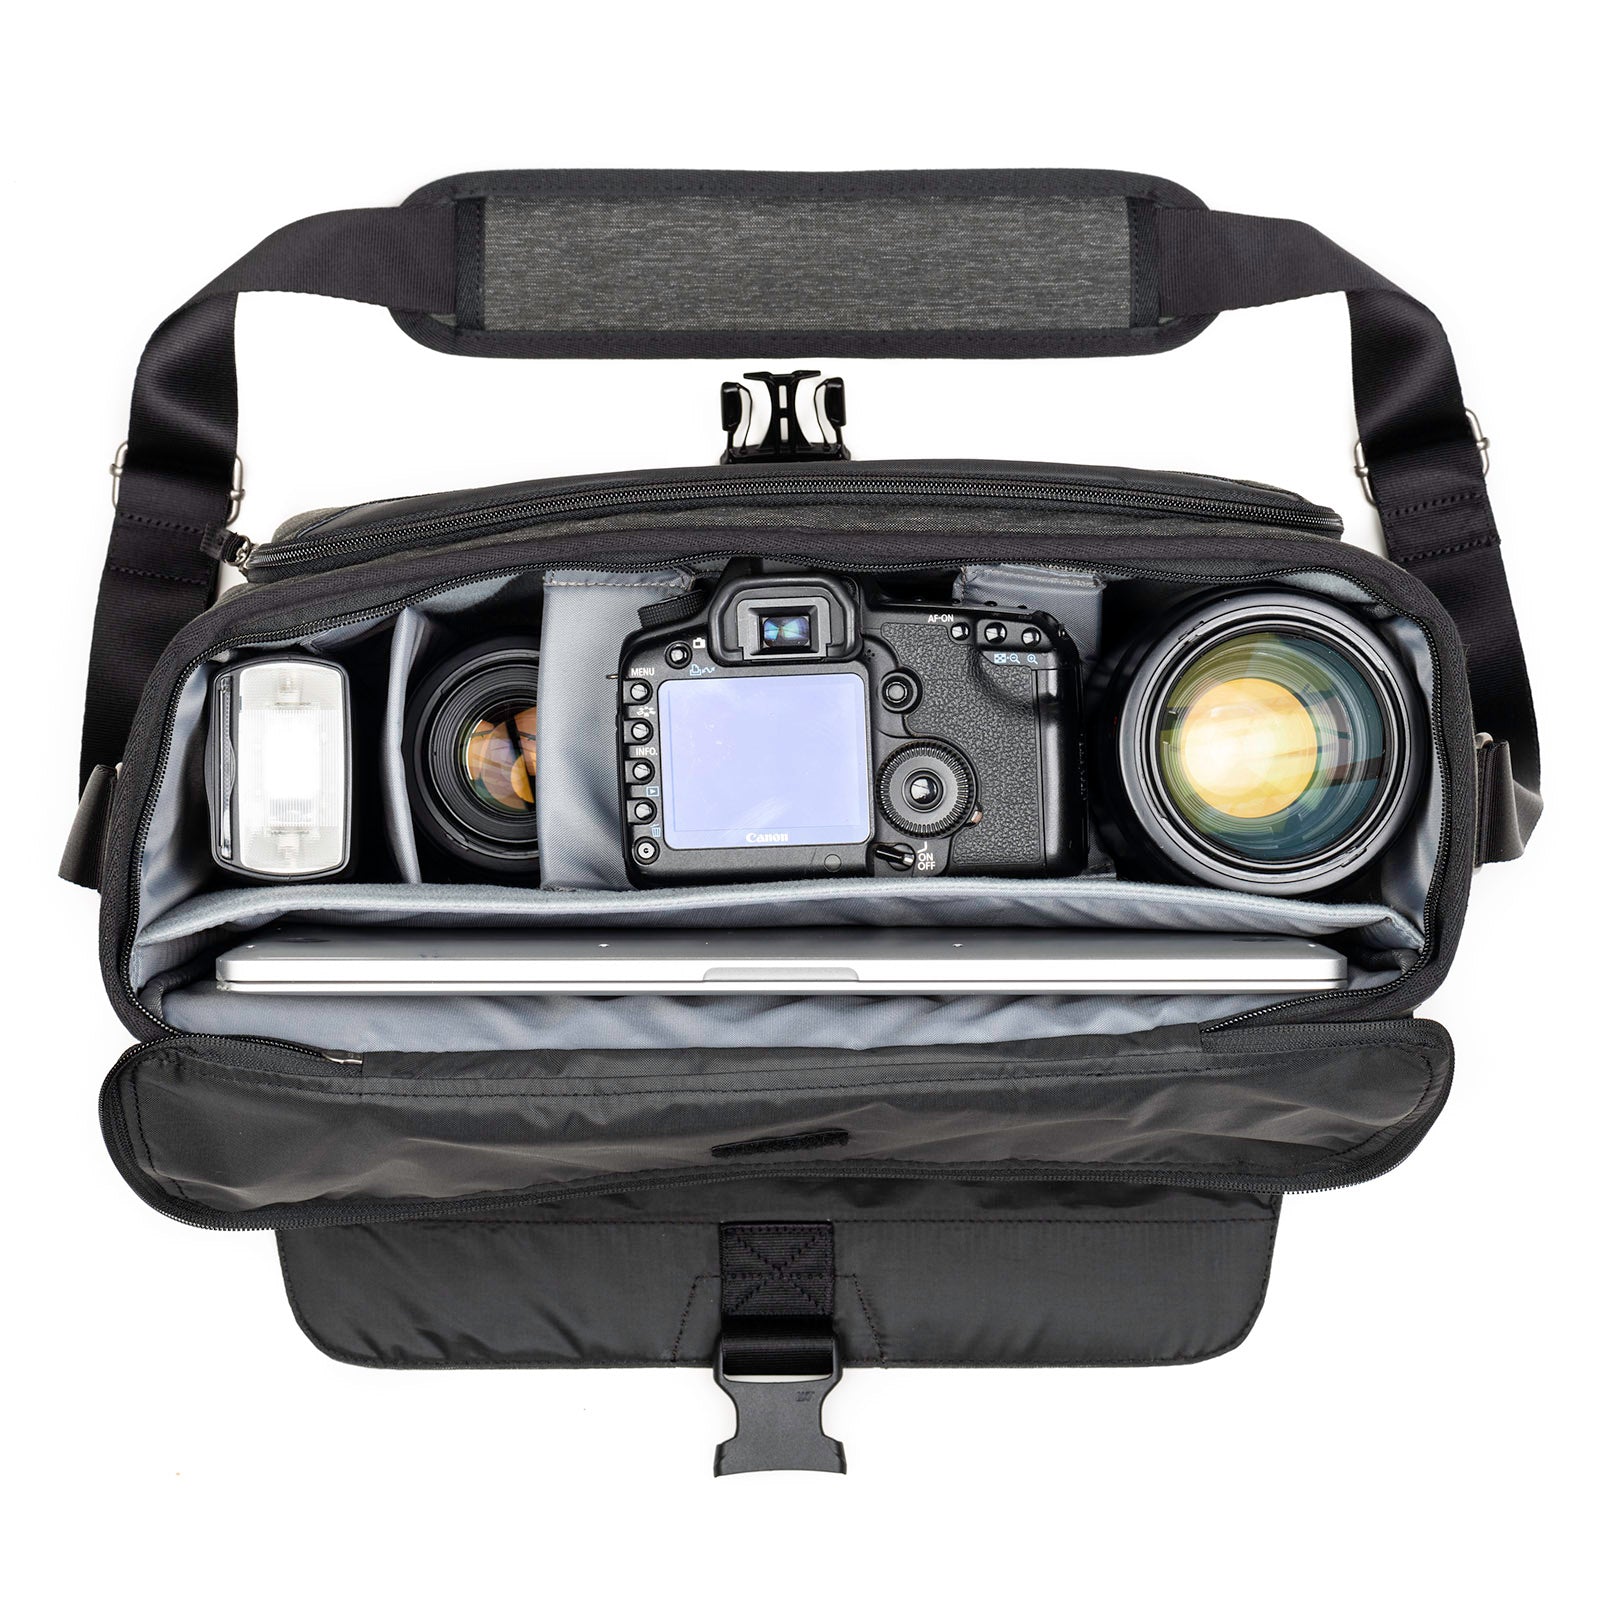 Fits one standard size body with a 24–70mm f/2.8 attached, 2–4 extra lenses, flash, a 10” tablet and a 15” laptop. Accommodates a 70–200mm f/2.8 detached.